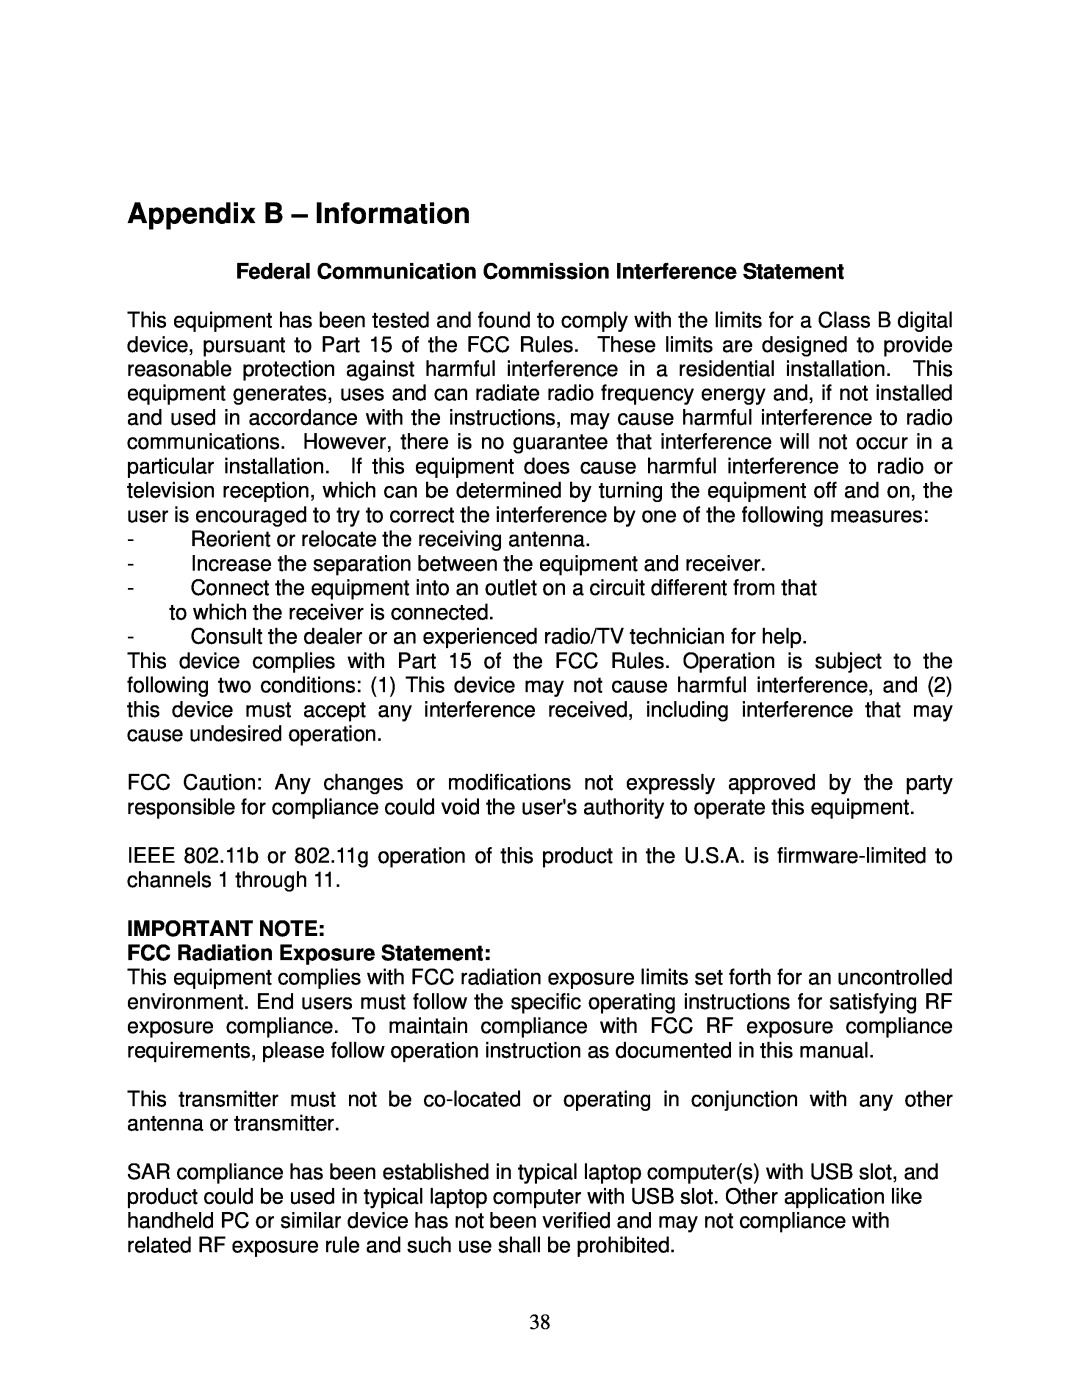 Airlink101 AWLL6090 user manual Appendix B - Information, Federal Communication Commission Interference Statement 